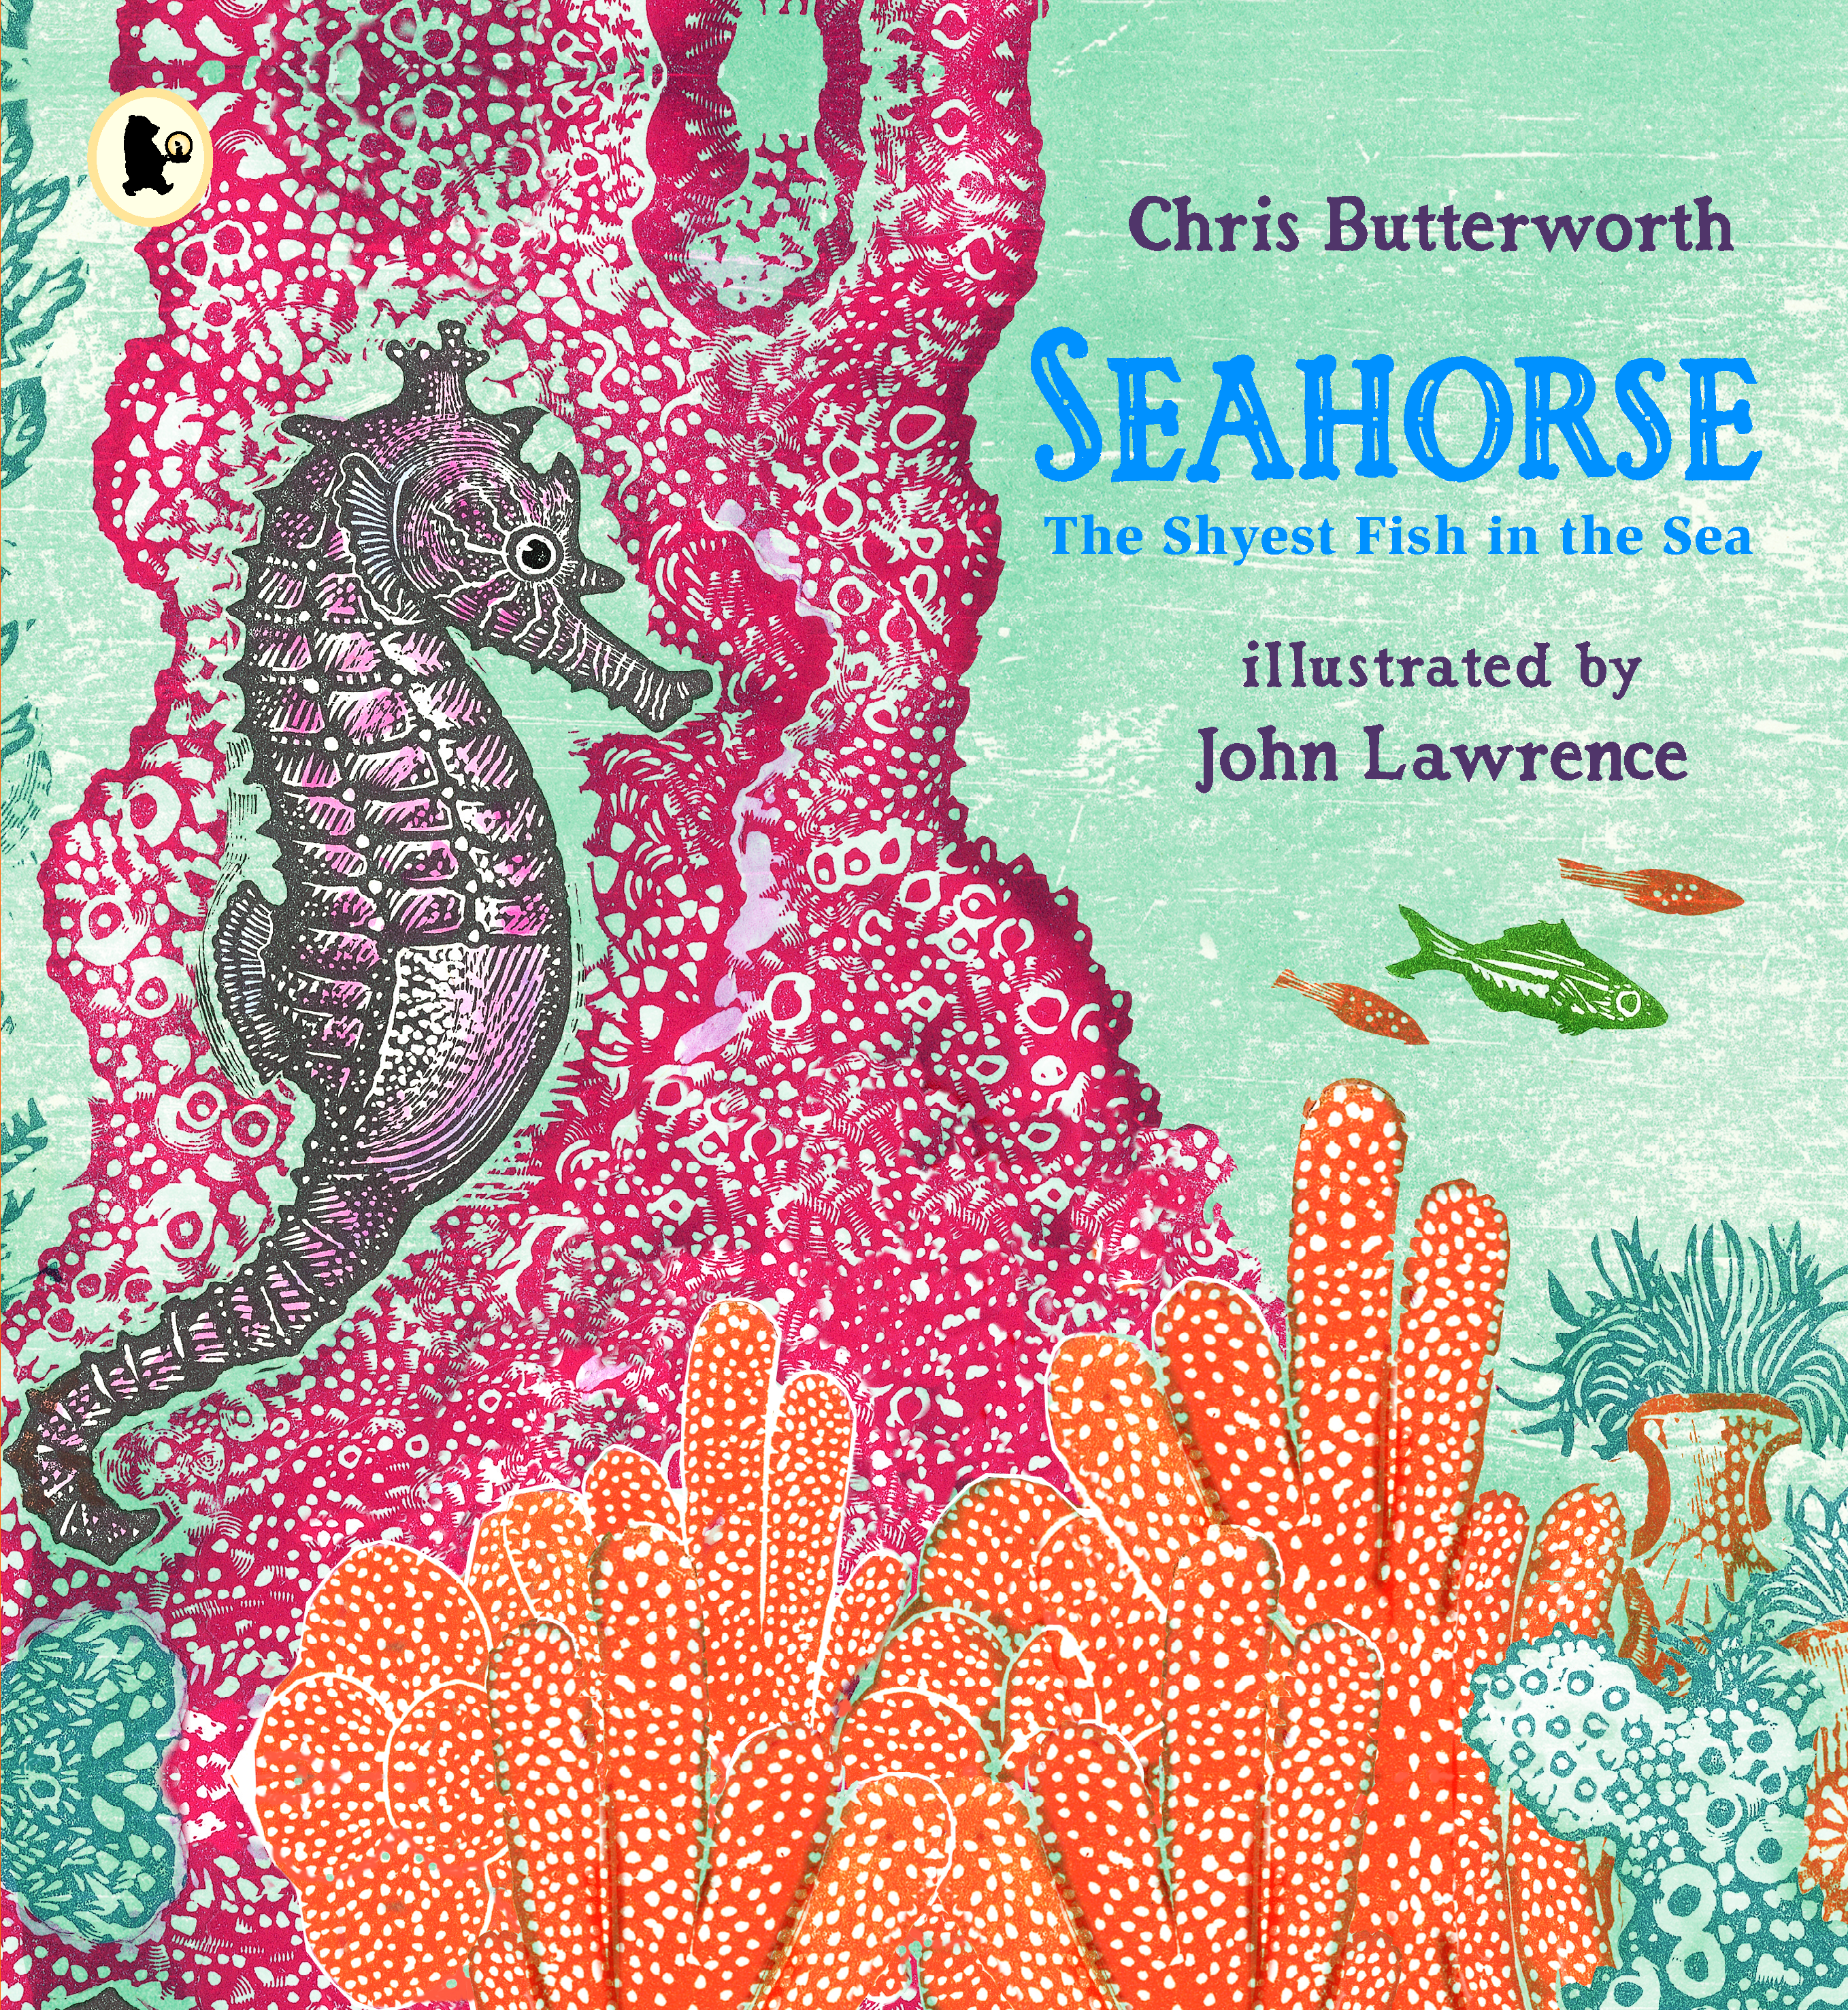 Seahorse-The-Shyest-Fish-in-the-Sea